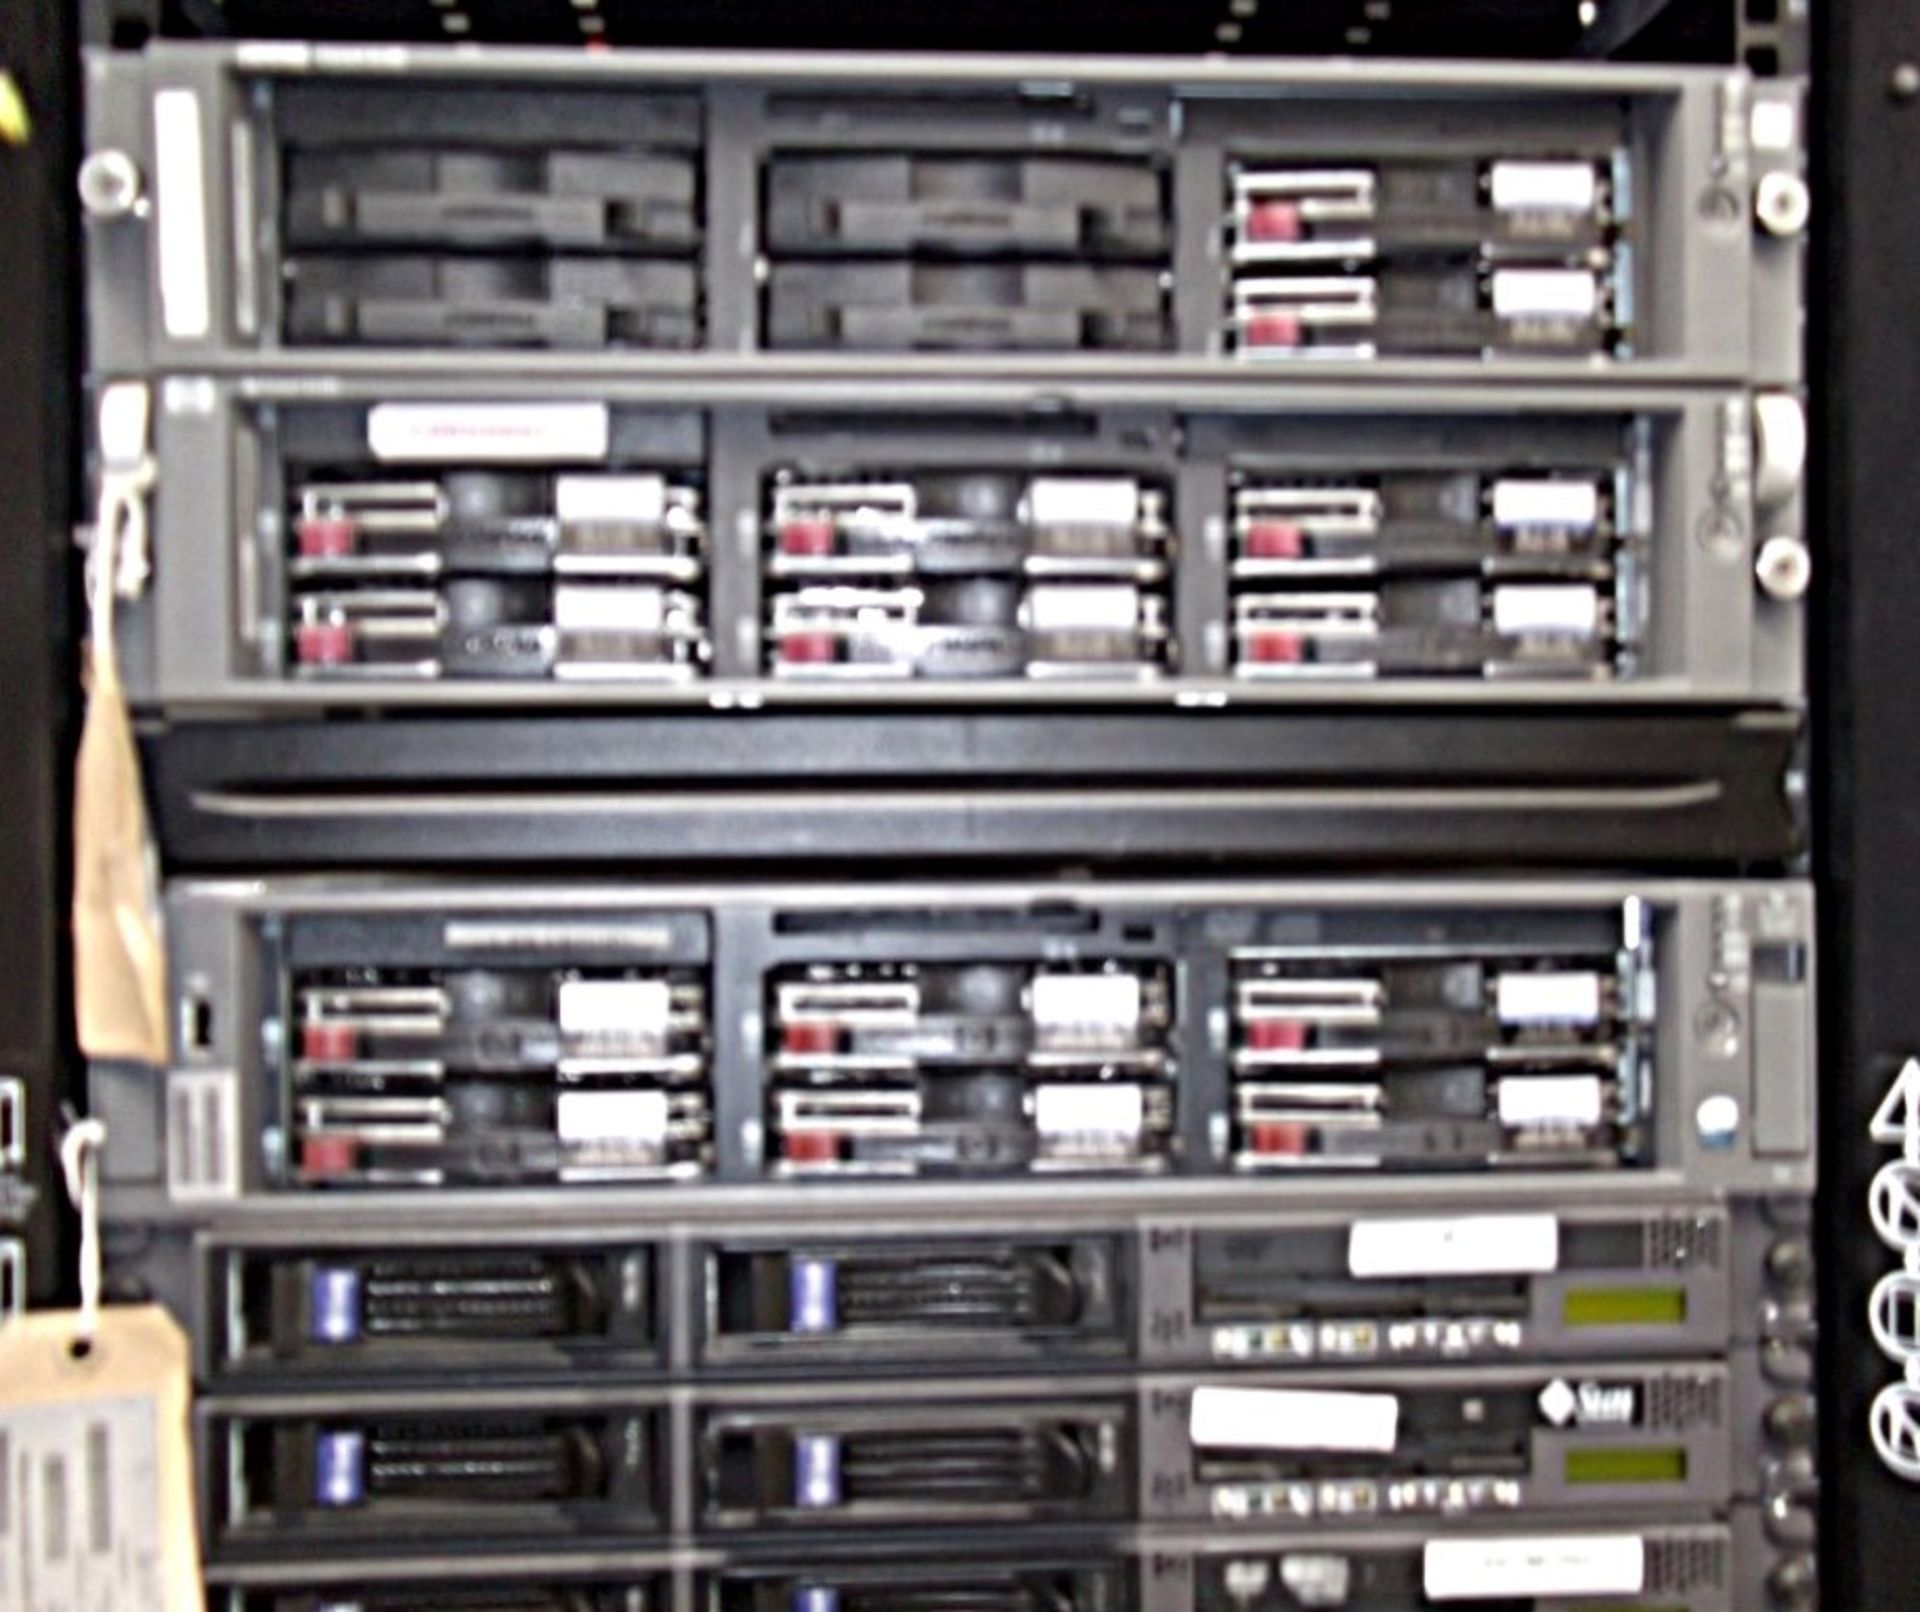 1 x APC Netshelter Server Rack With 12 x Assorted Sun Fire & HP Proliant Filer Systems Including - Image 3 of 9